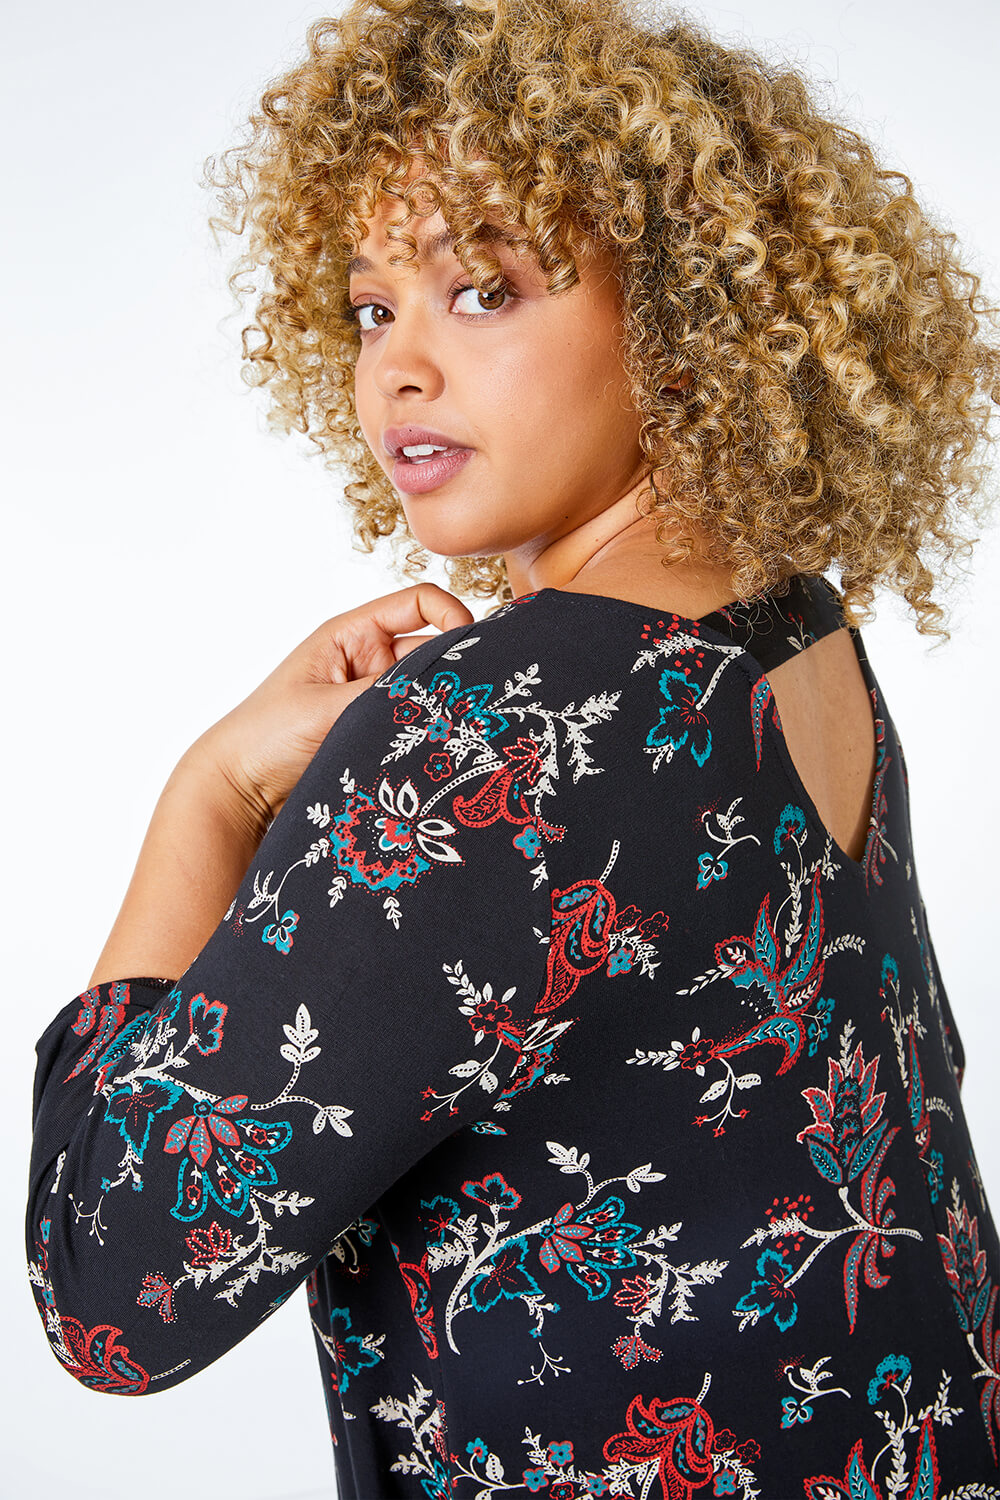 Teal Curve Floral Print Stretch Top, Image 4 of 5